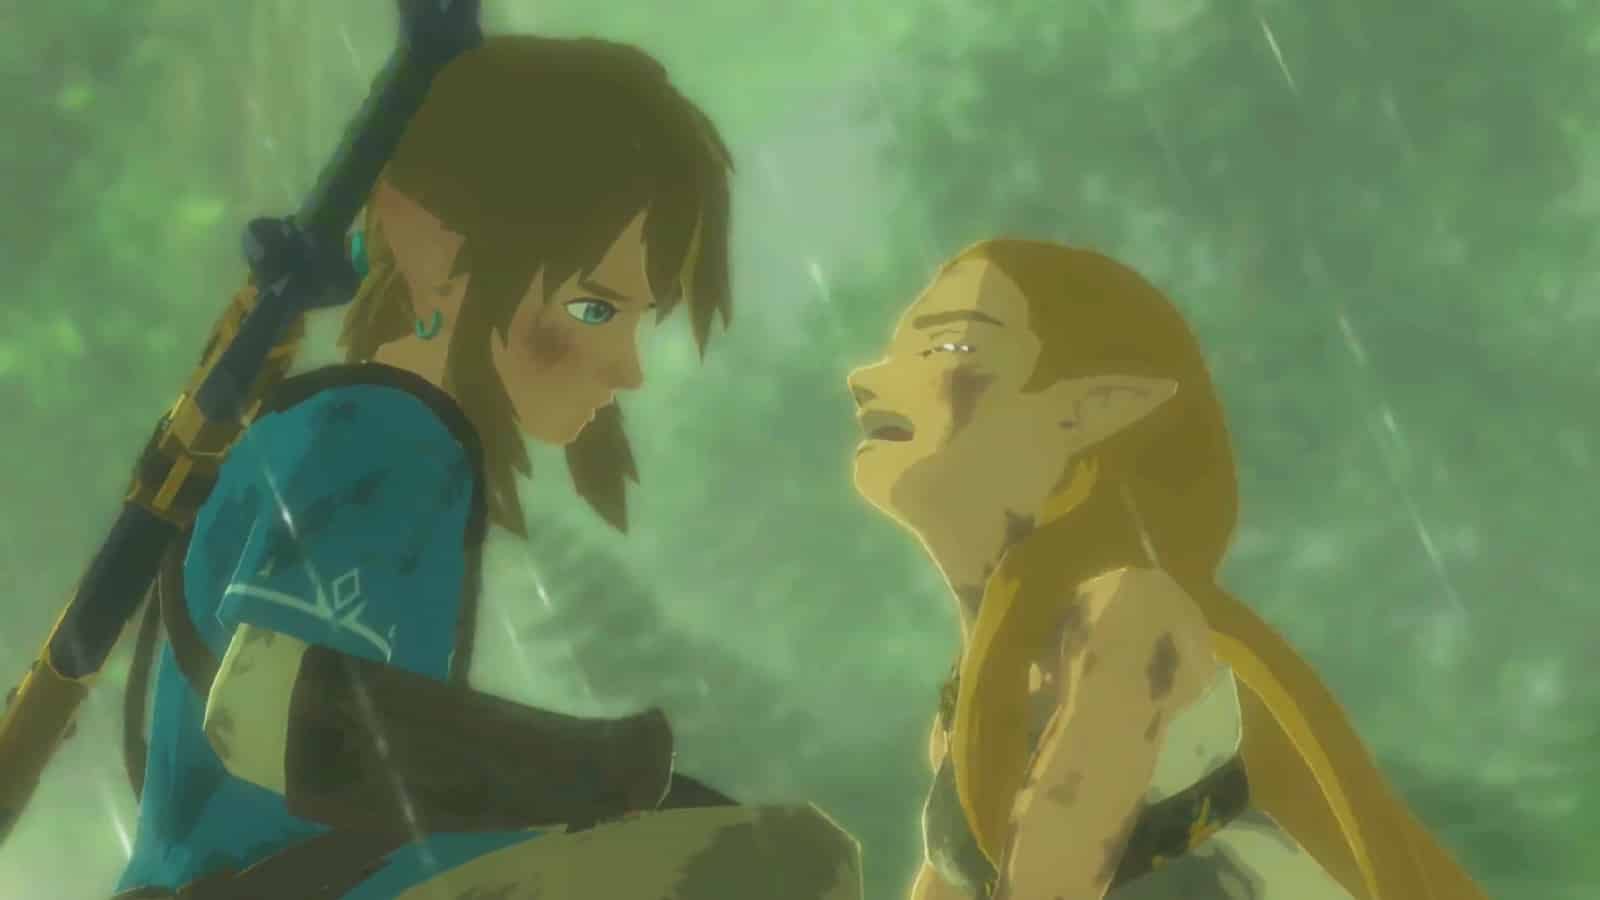 Link and Zelda crying Breath of the Wild trailer